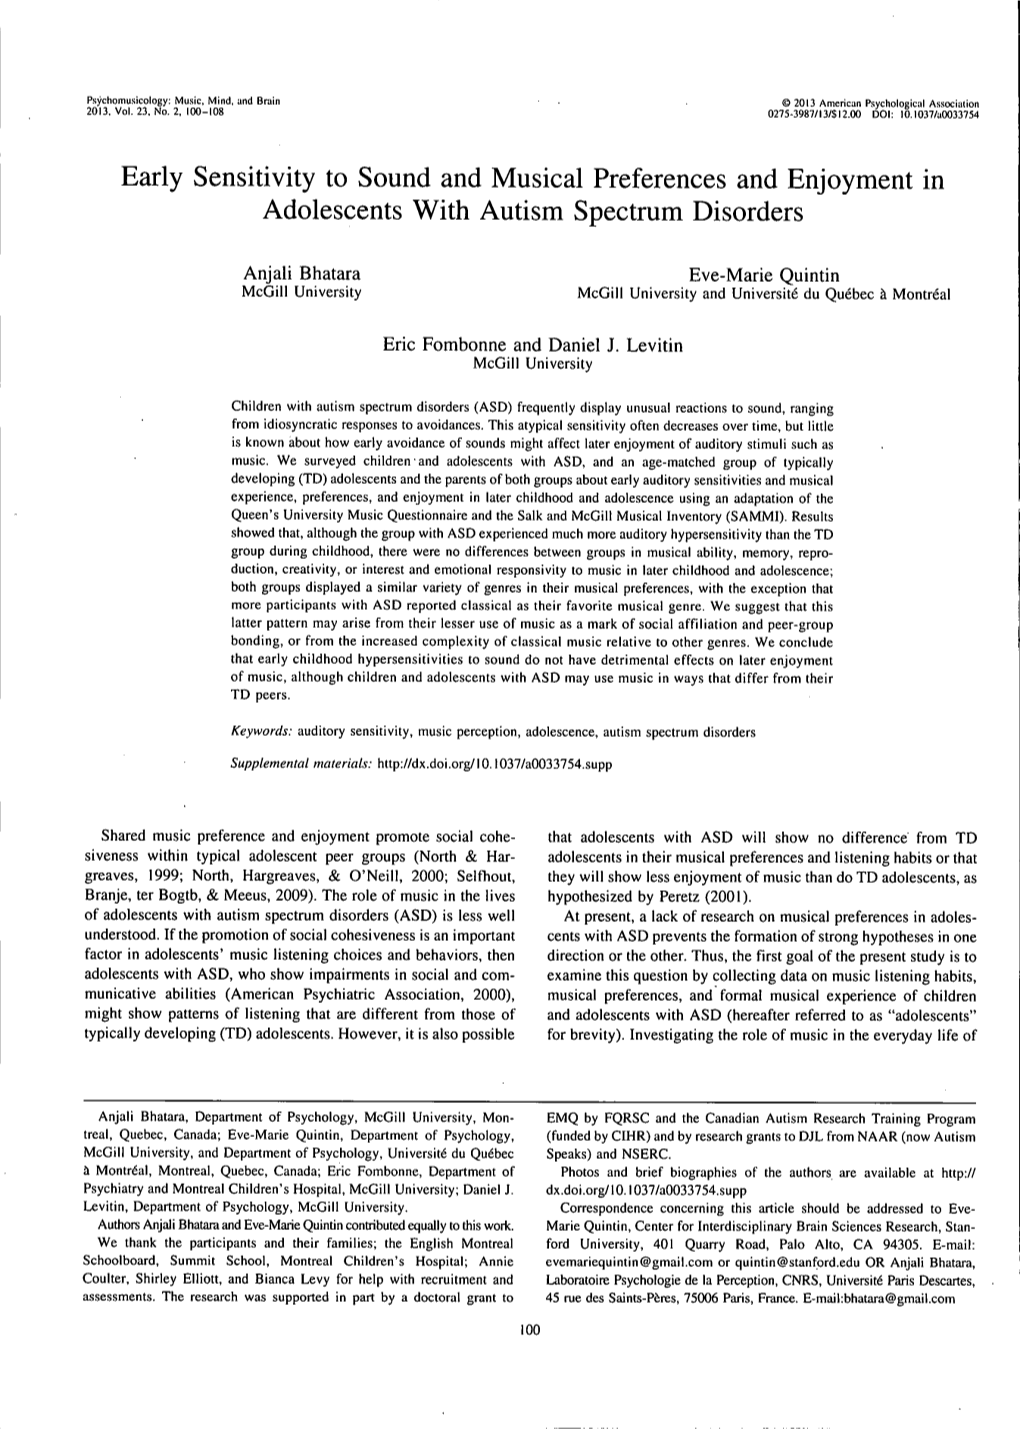 Early Sensitivity to Sound and Musical Preferences and Enjoyment in Adolescents with Autism Spectrum Disorders